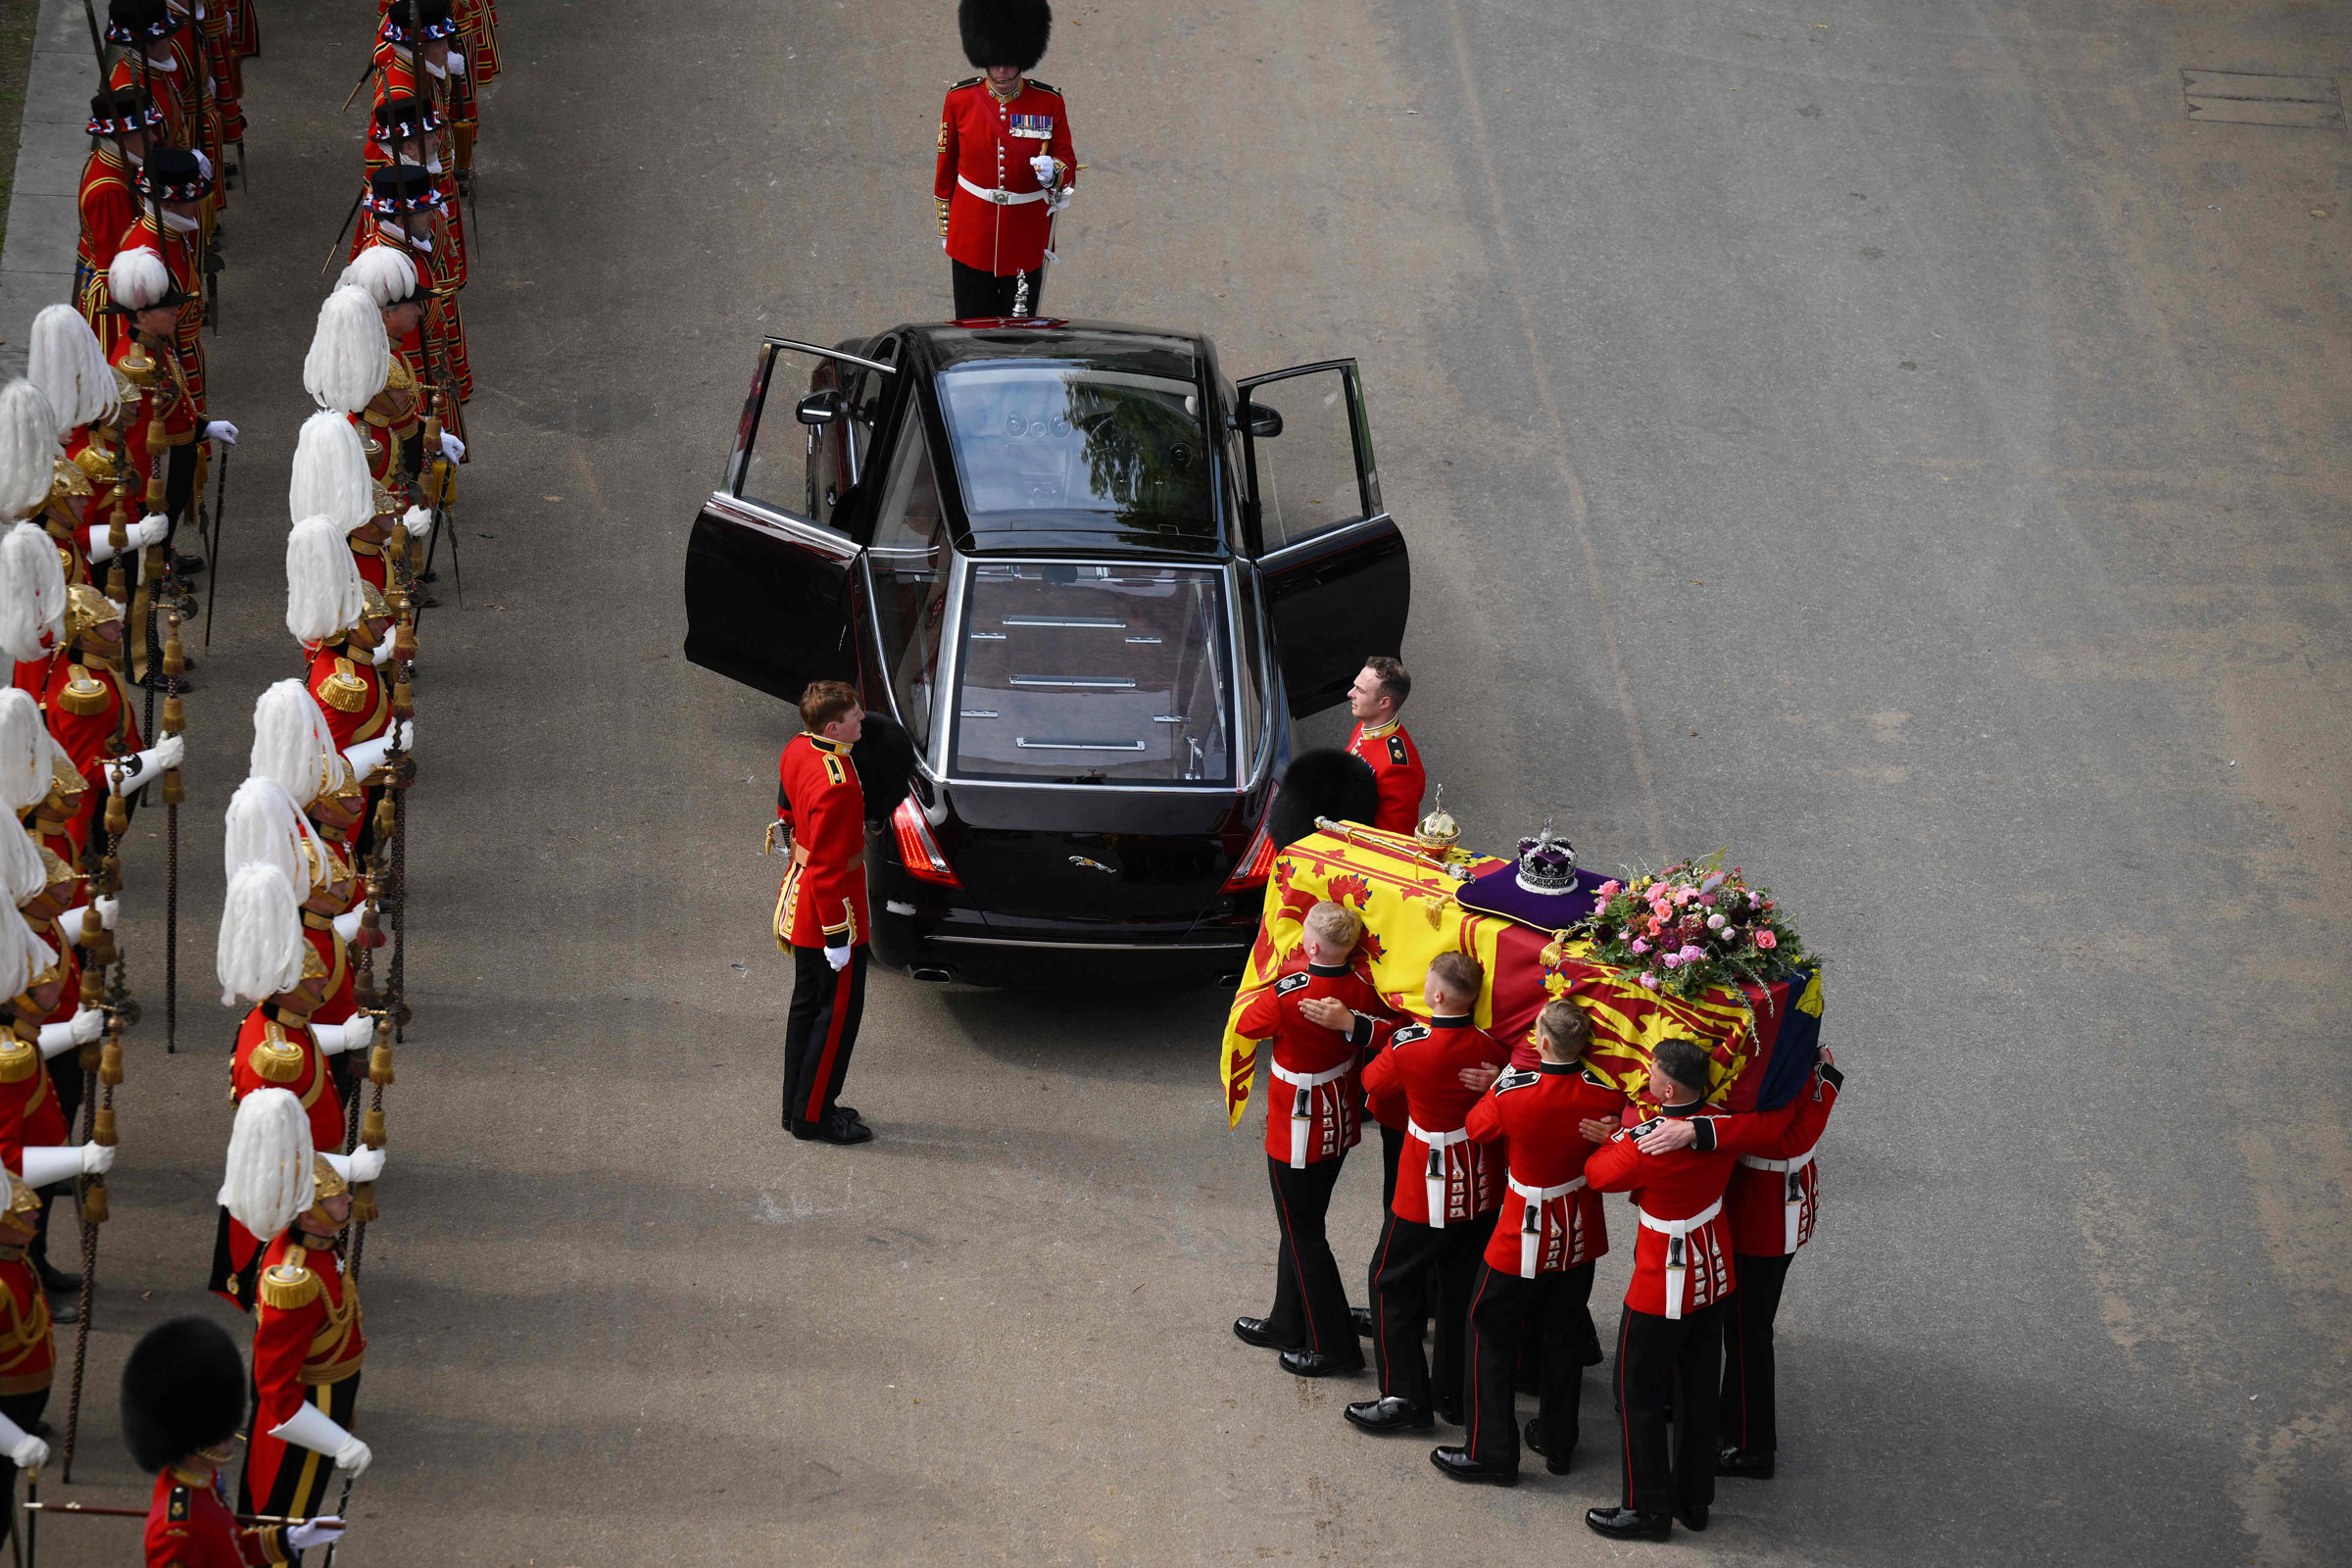 The Bearer Party transfer the coffin of Queen Elizabeth II, draped in the Royal Standard, into the State Hearse at Wellington Arch, after the State Funeral Service of Britain's Queen Elizabeth II.